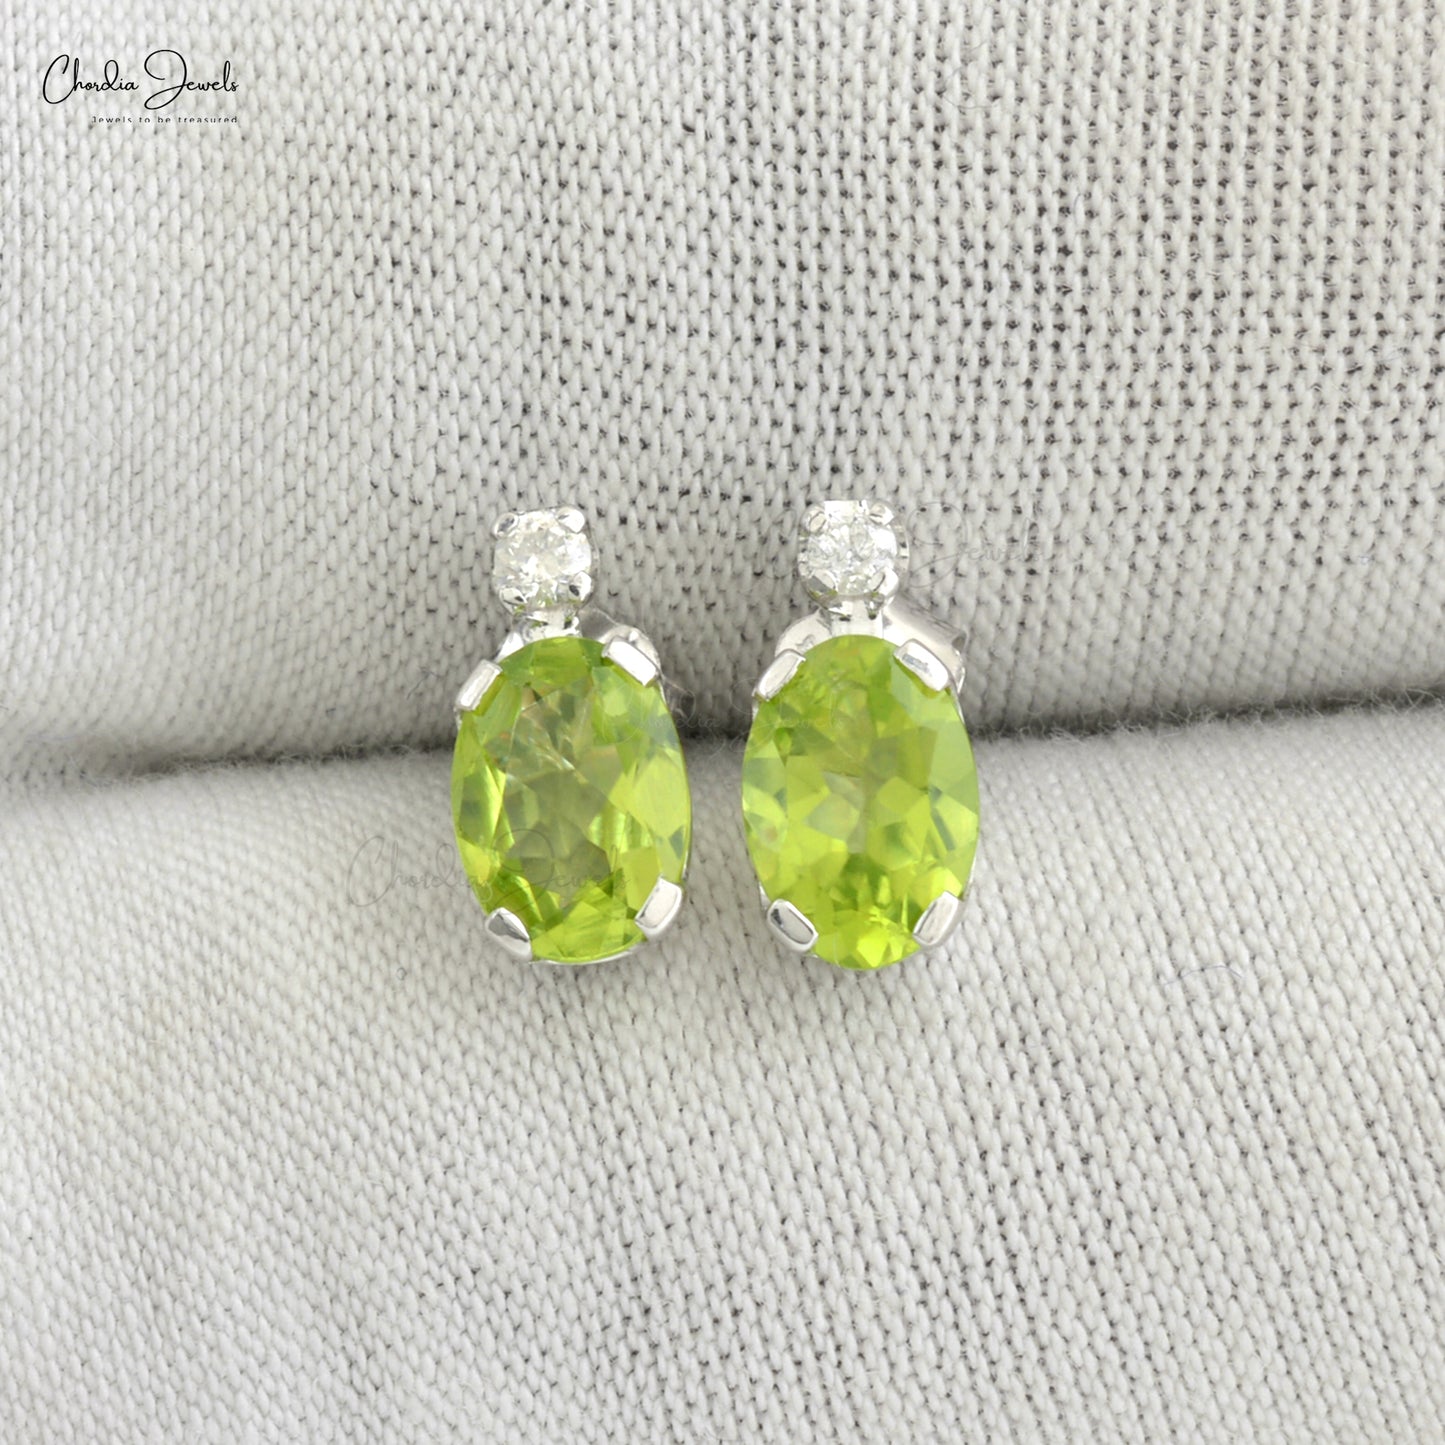 Oval Cut 7x5mm Natural Peridot Diamond Accented Studs Earrings 14k Solid White Gold Earrings For Her